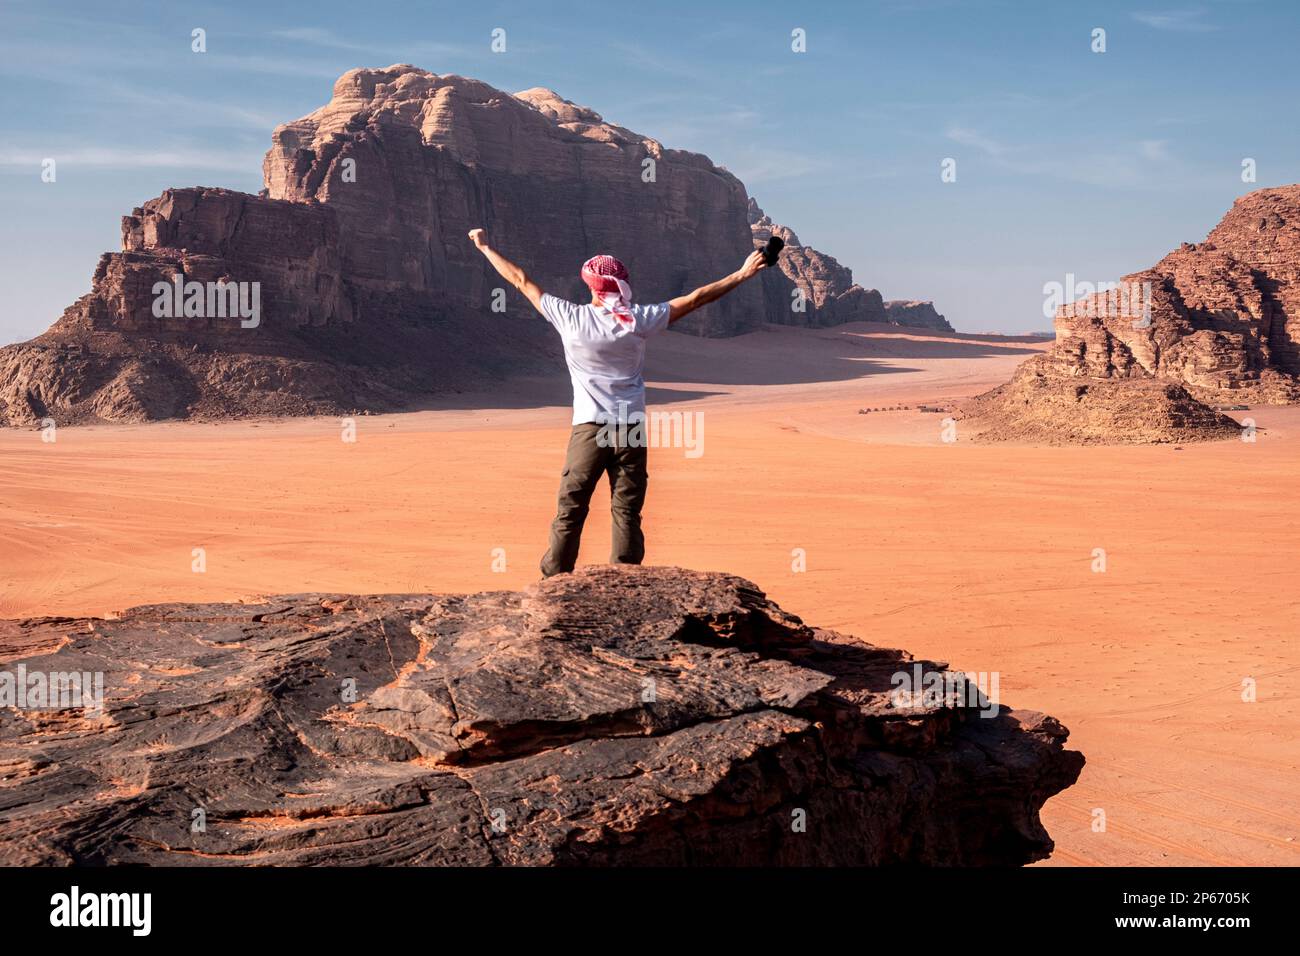 A man with a turban and his hands raised standing on a rock in the Wadi Rum desert, UNESCO World Heritage Site, Jordan, Middle East Stock Photo